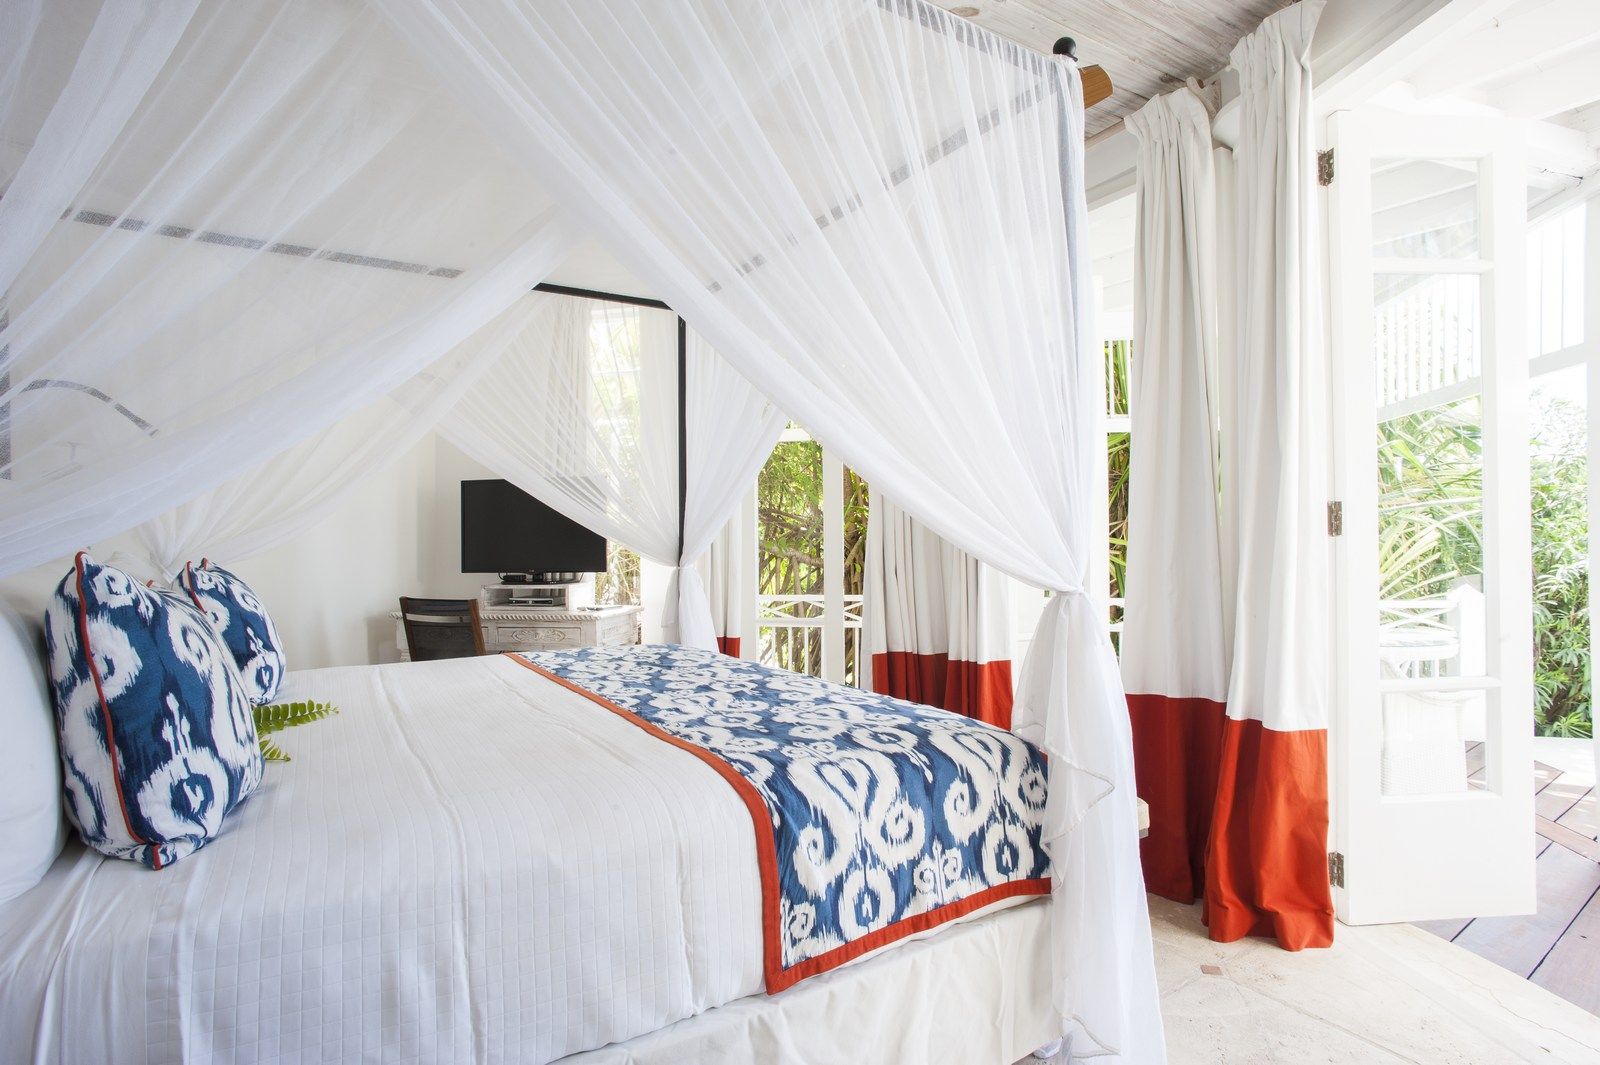 Bedroom at The Cotton House, Mustique